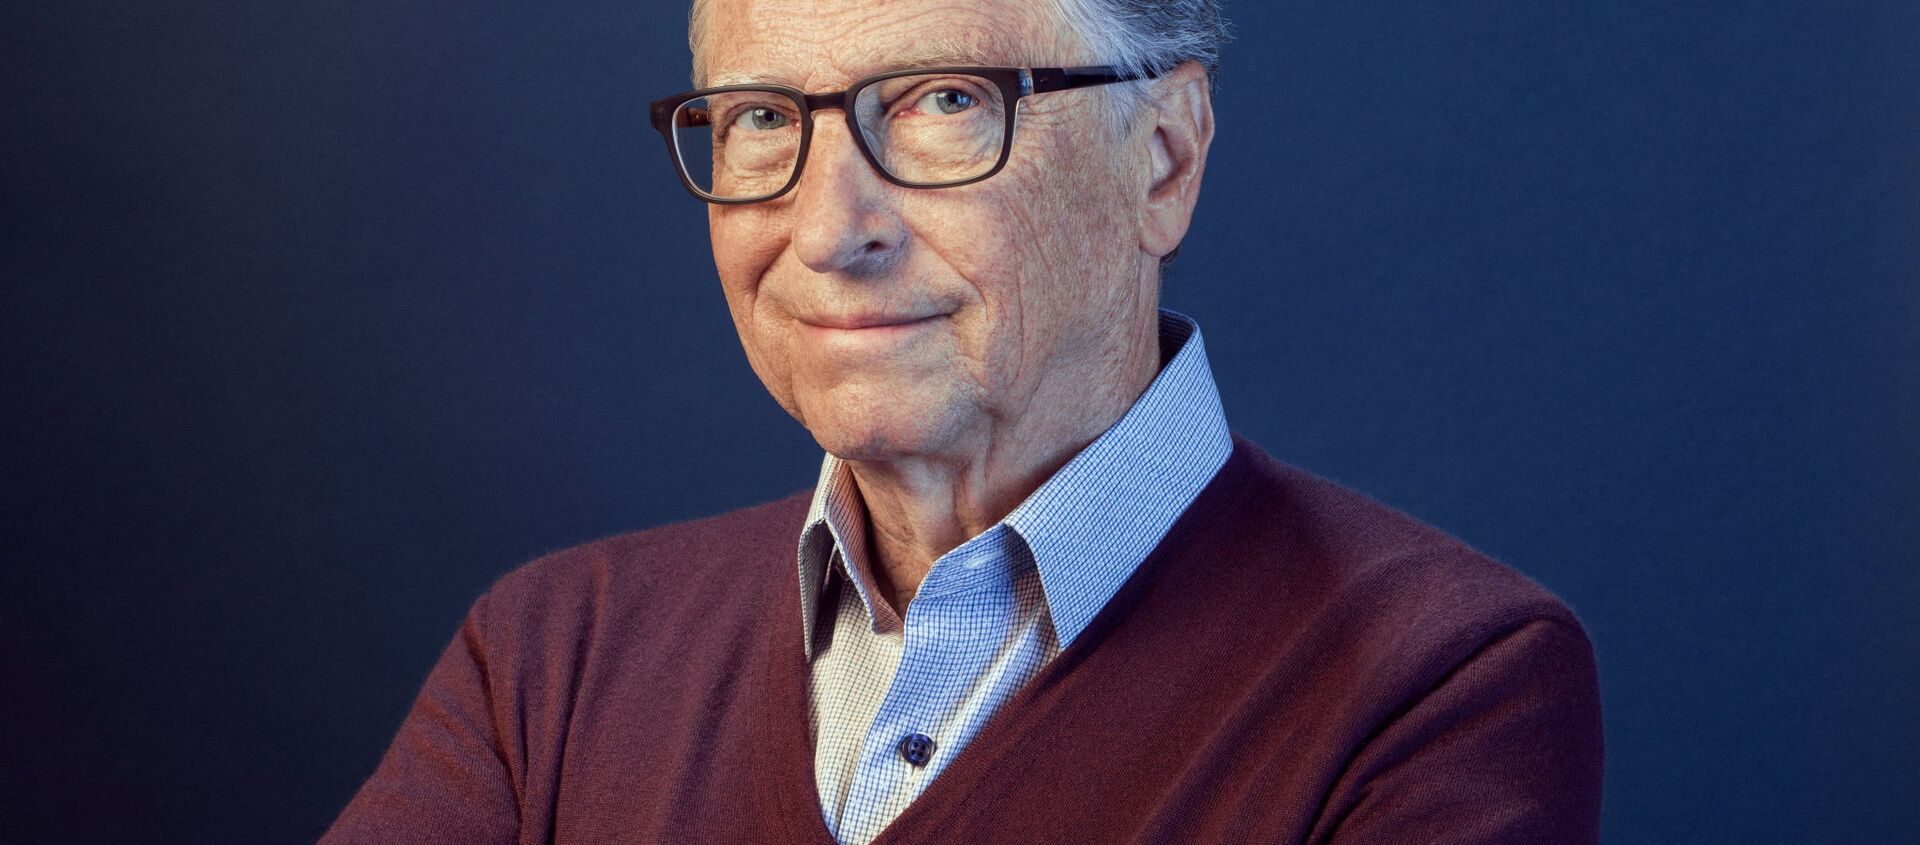 Bill Gates poses in this undated handout photo obtained by Reuters on February 15, 2021 - Sputnik International, 1920